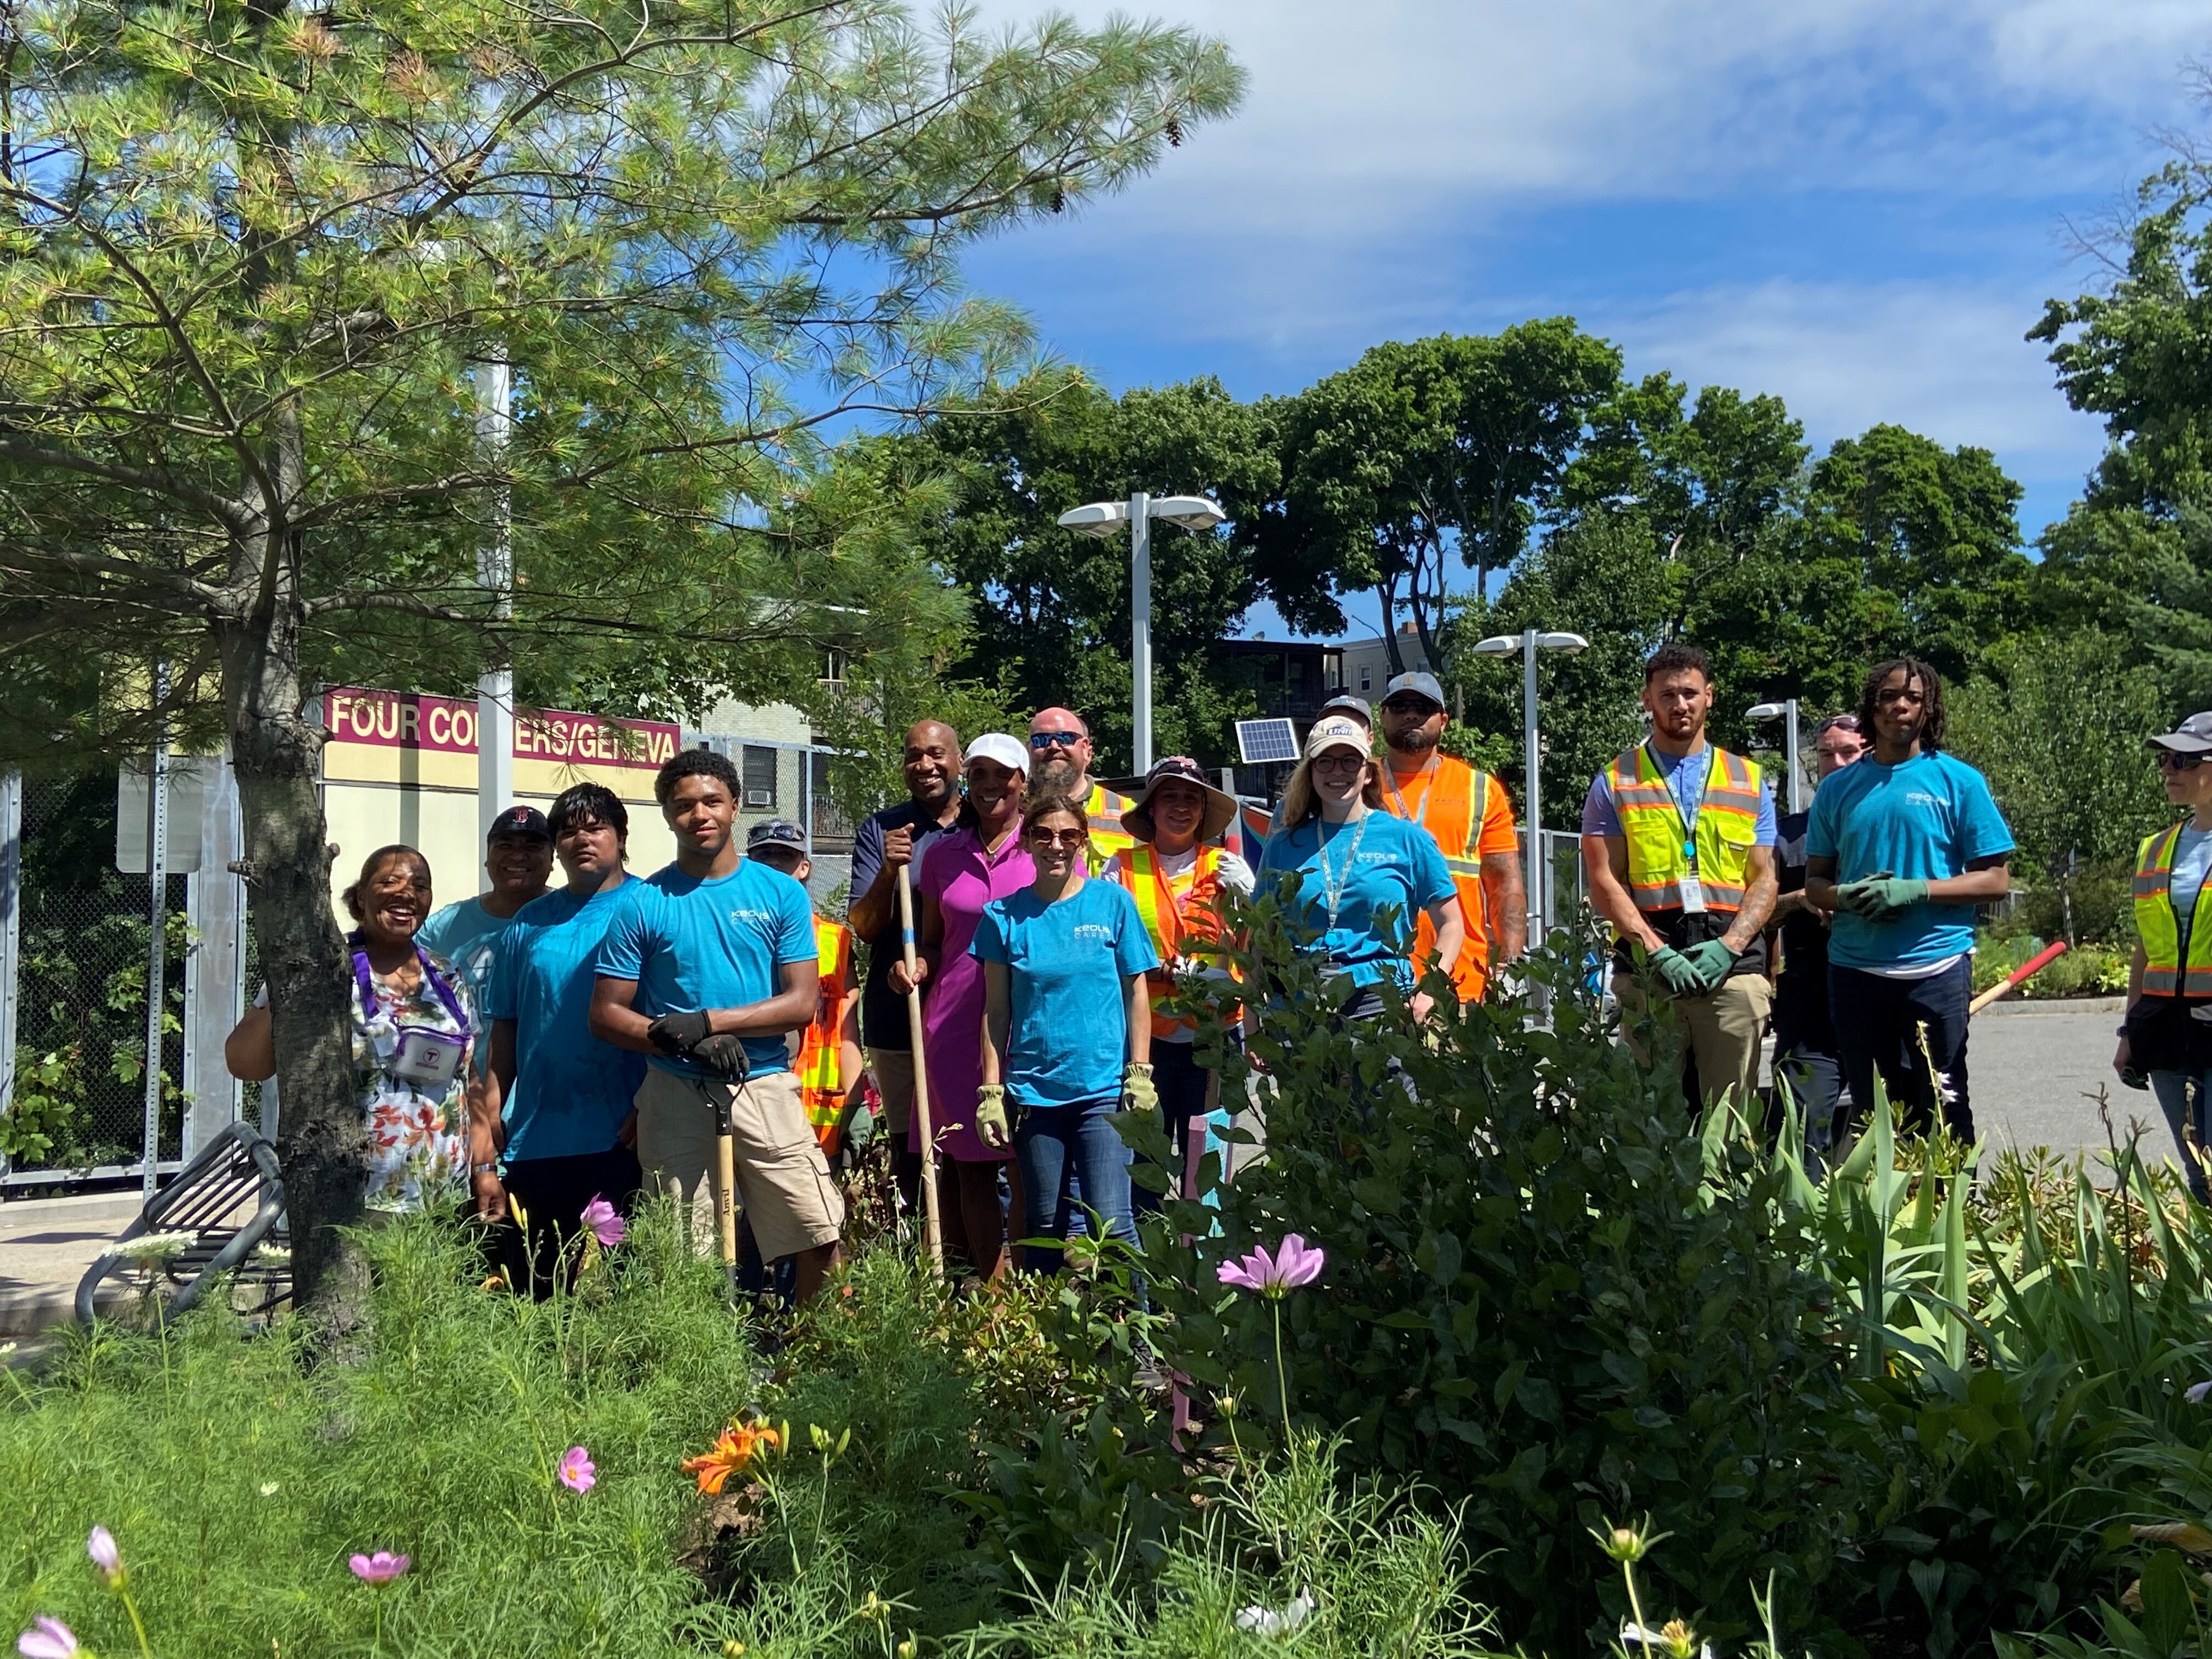 A group of Keolis employees and volunteers plant flowers at Four Corners Station